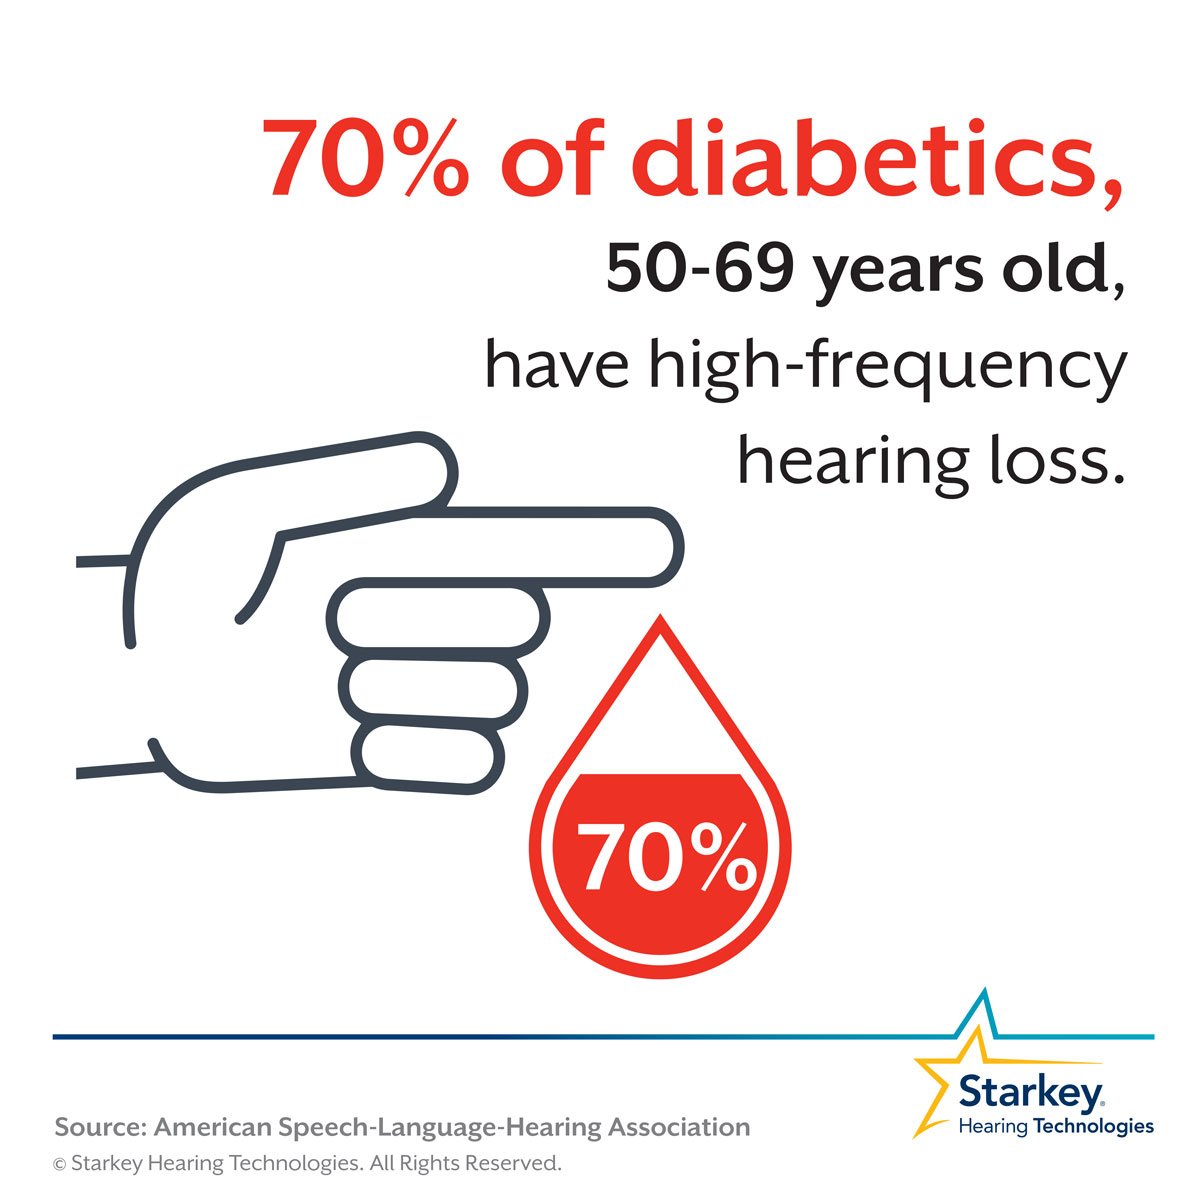 Diabetes can increase your risk for hearing loss